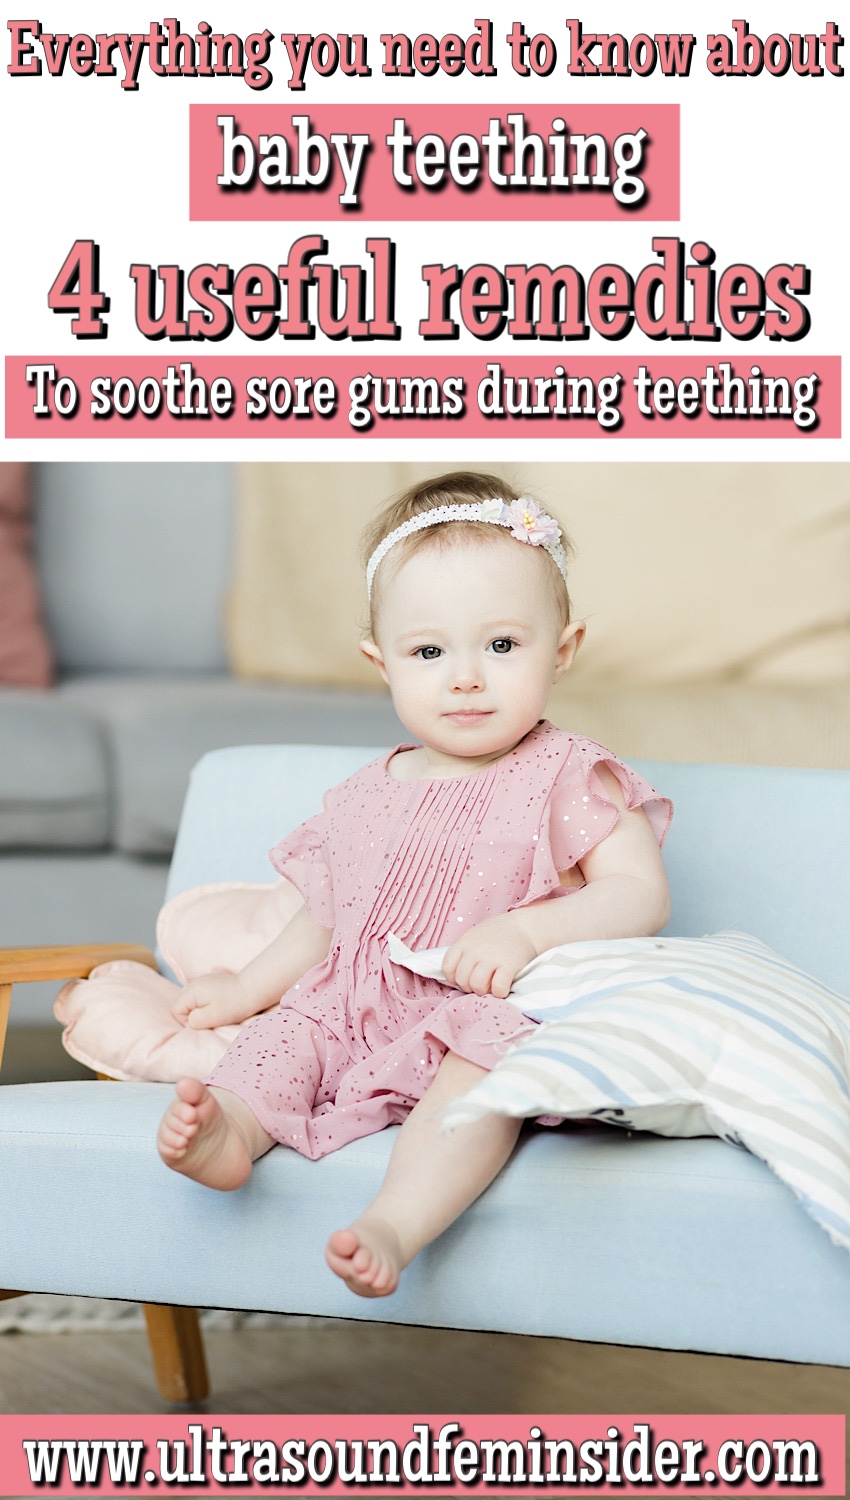 All you need to know about baby teething. Natural remedies for sore gums.